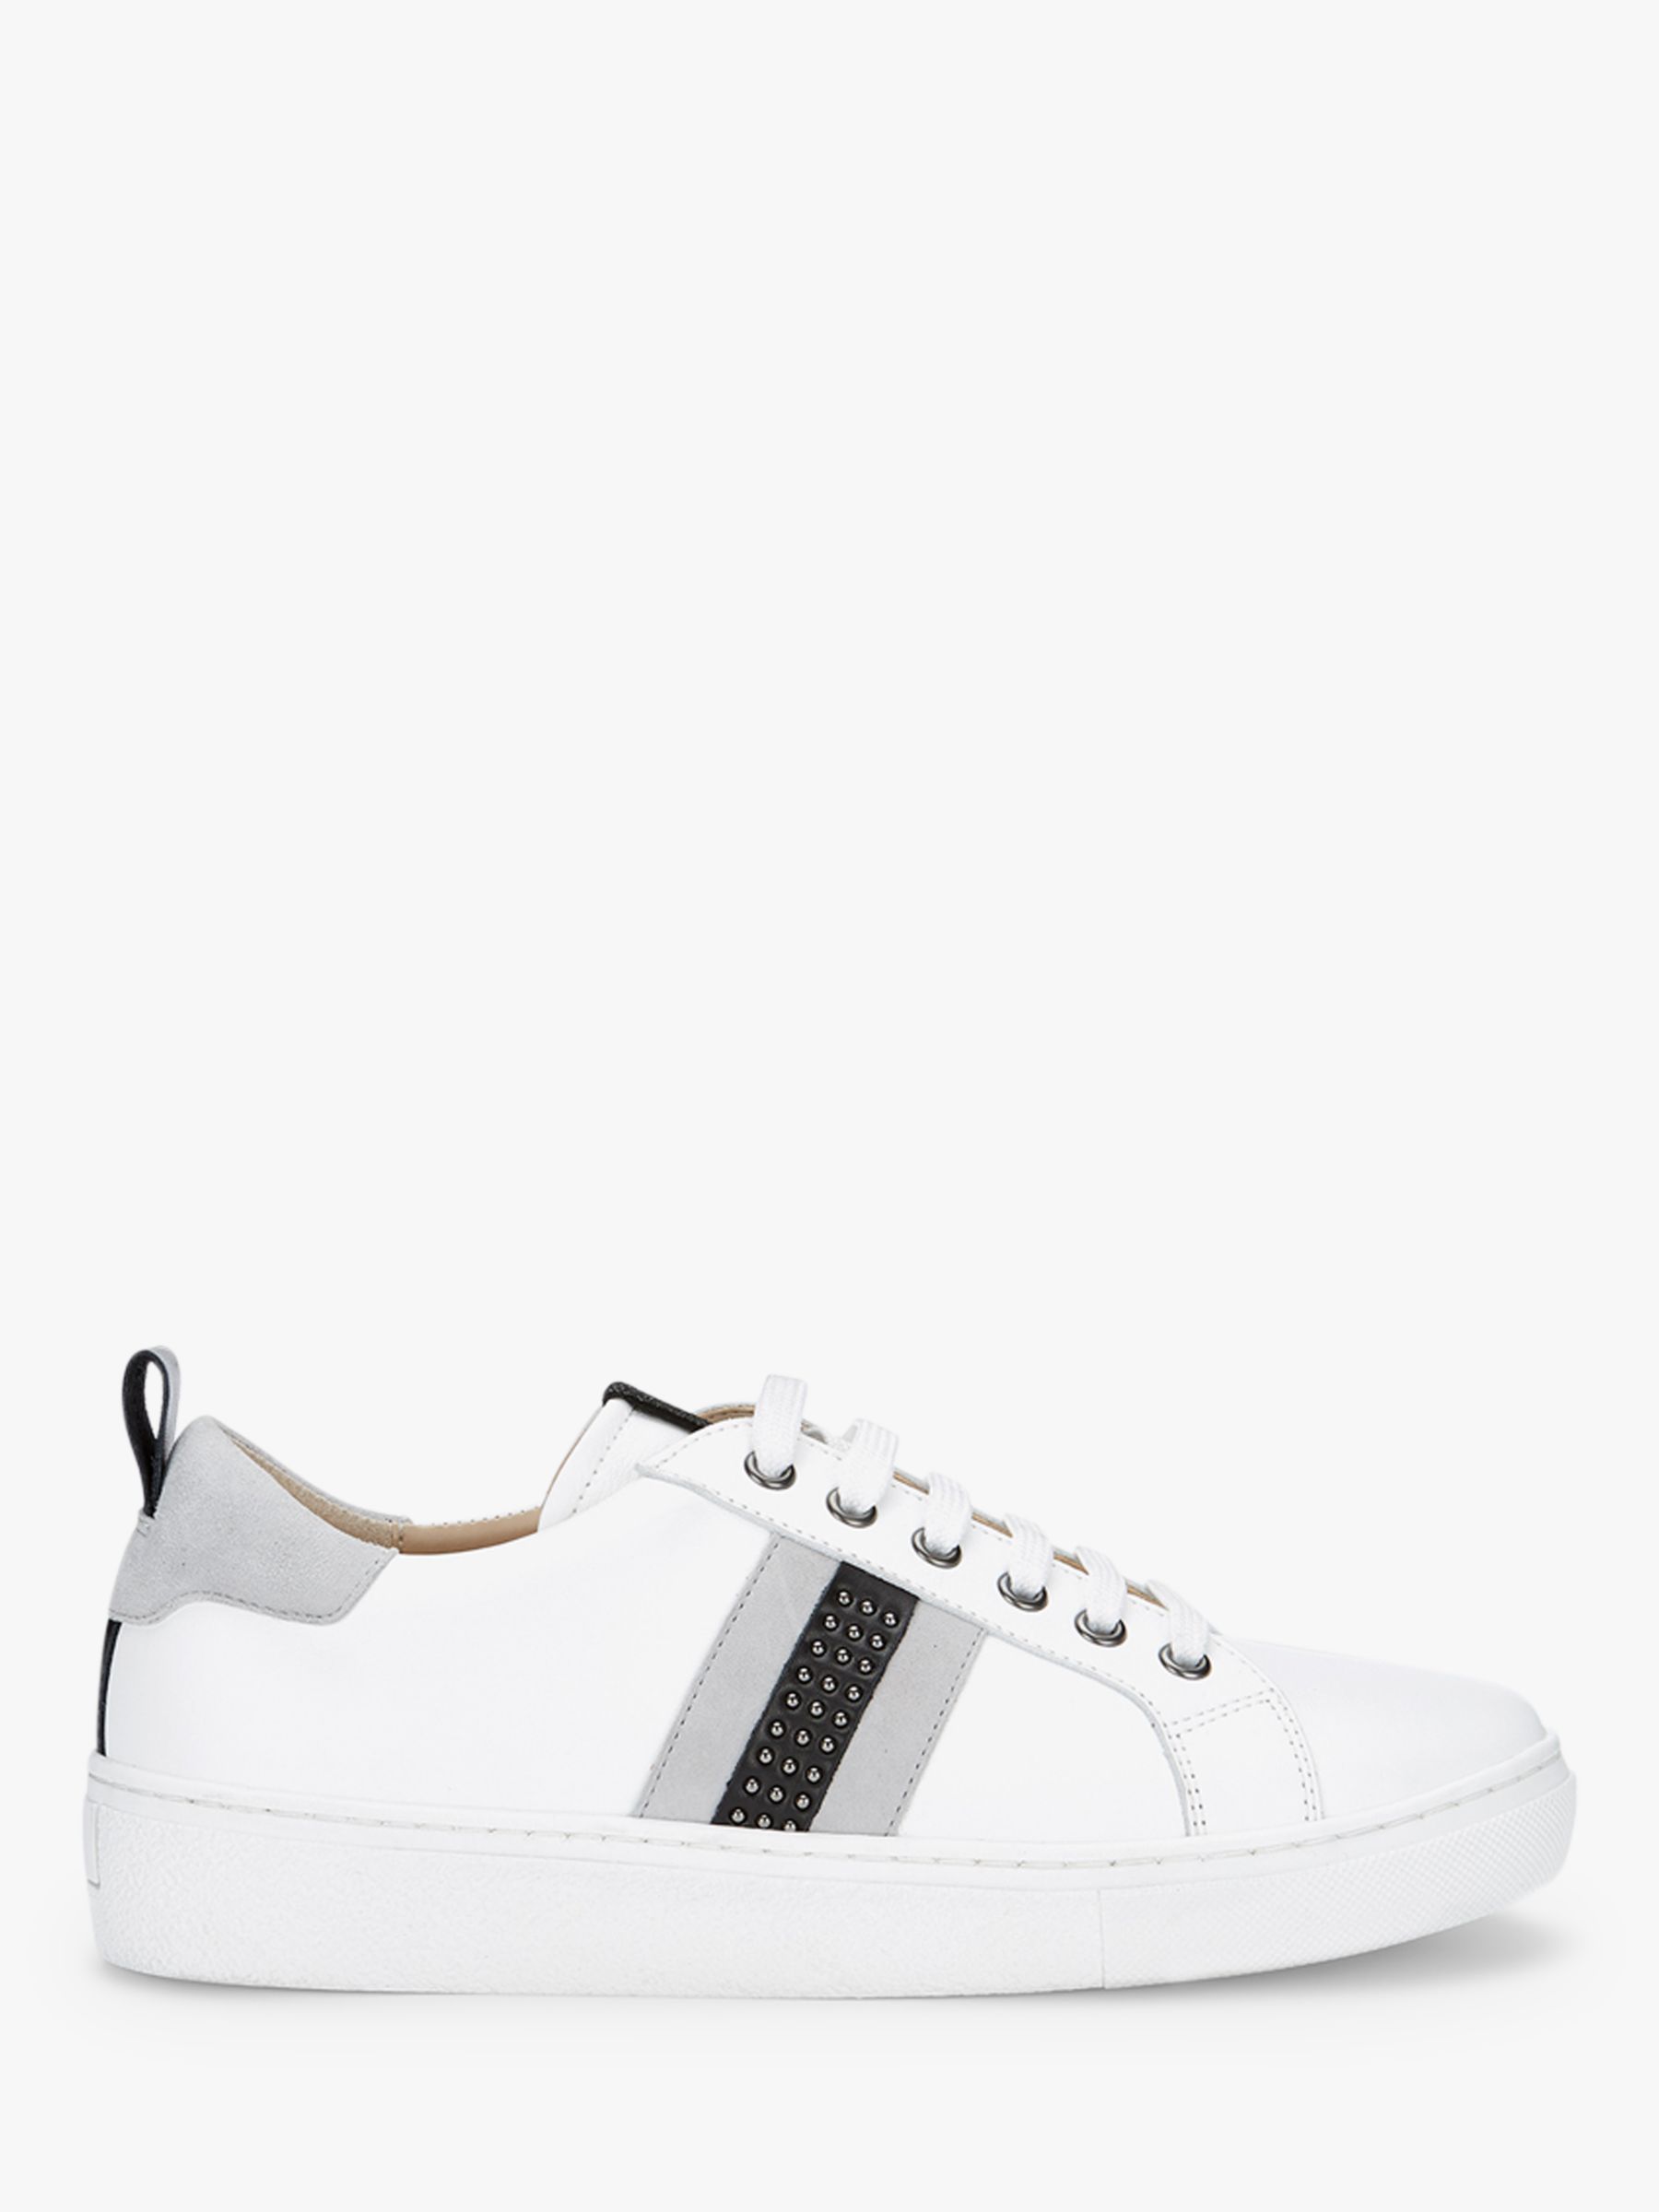 Mint Velvet Allie Stud Lace Up Leather Trainers, White at John Lewis ...